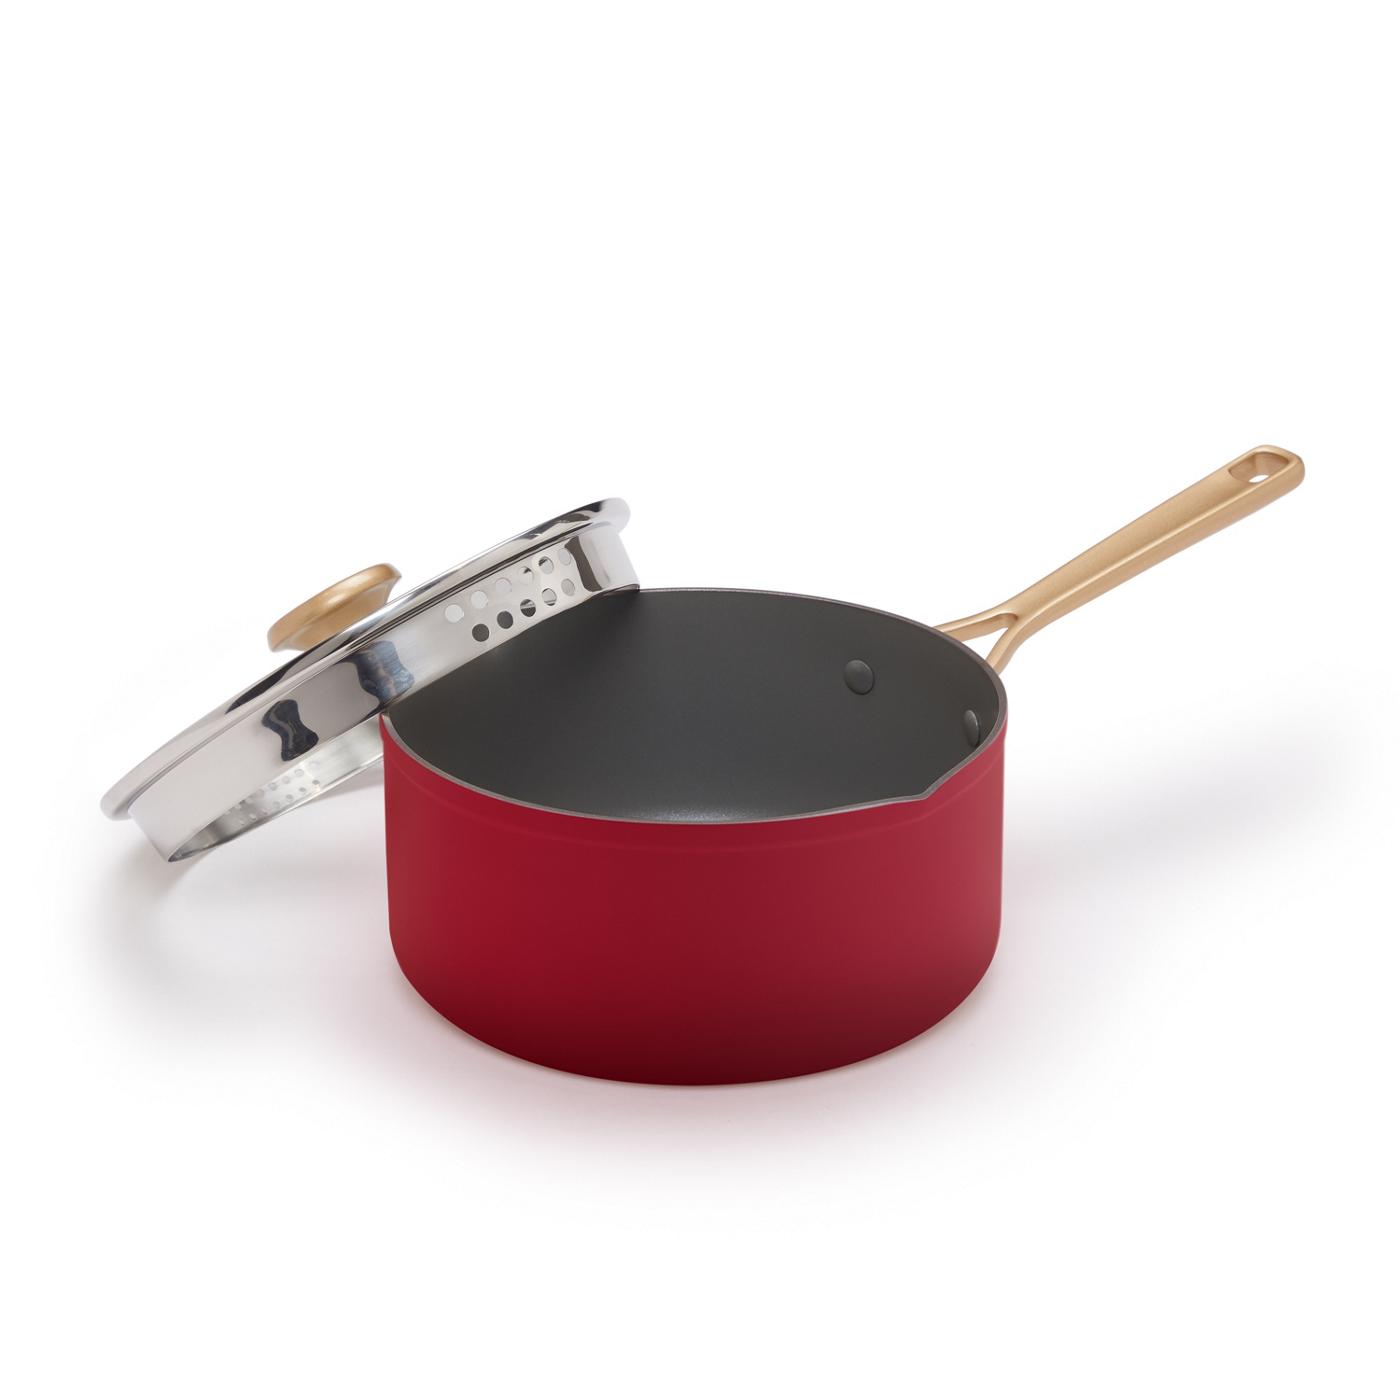 Kitchen & Table by H-E-B Non-Stick Saucepan - Bordeaux Red; image 1 of 7